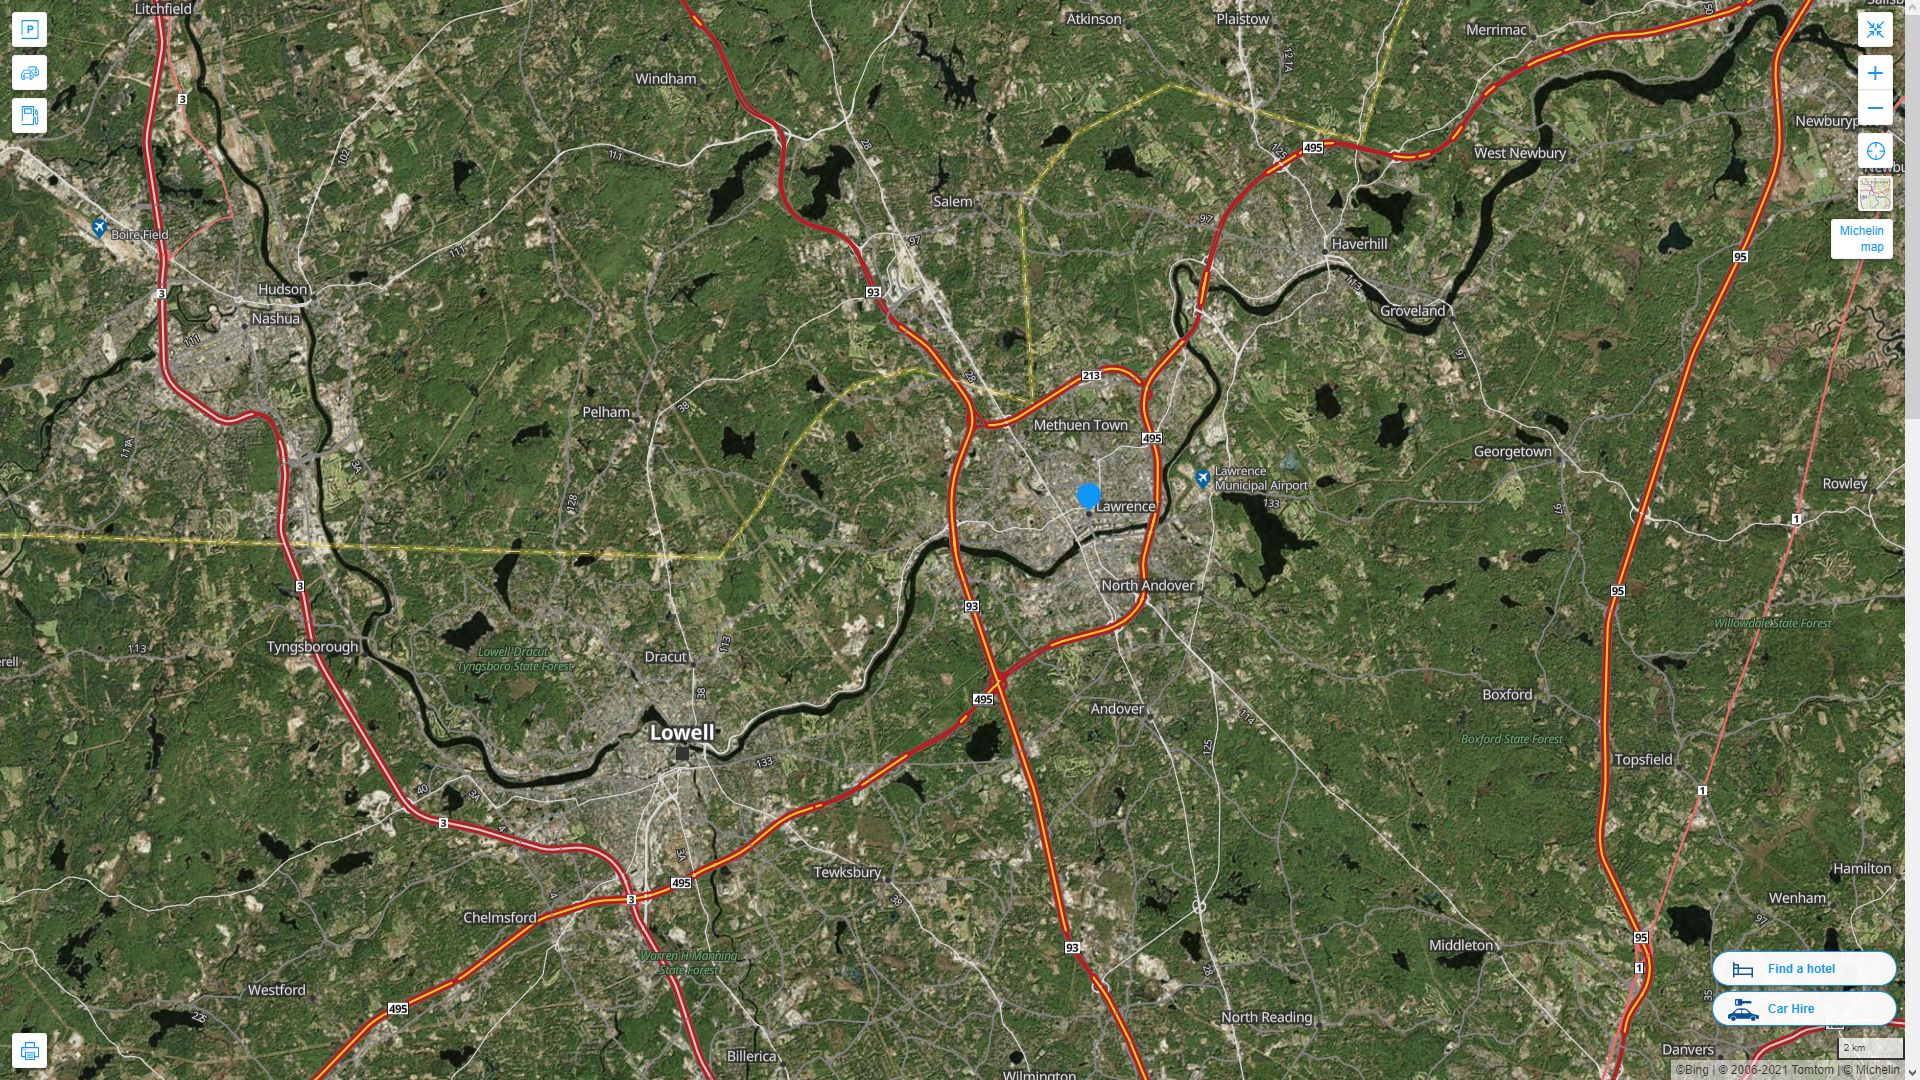 Lawrence Massachusetts Highway and Road Map with Satellite View